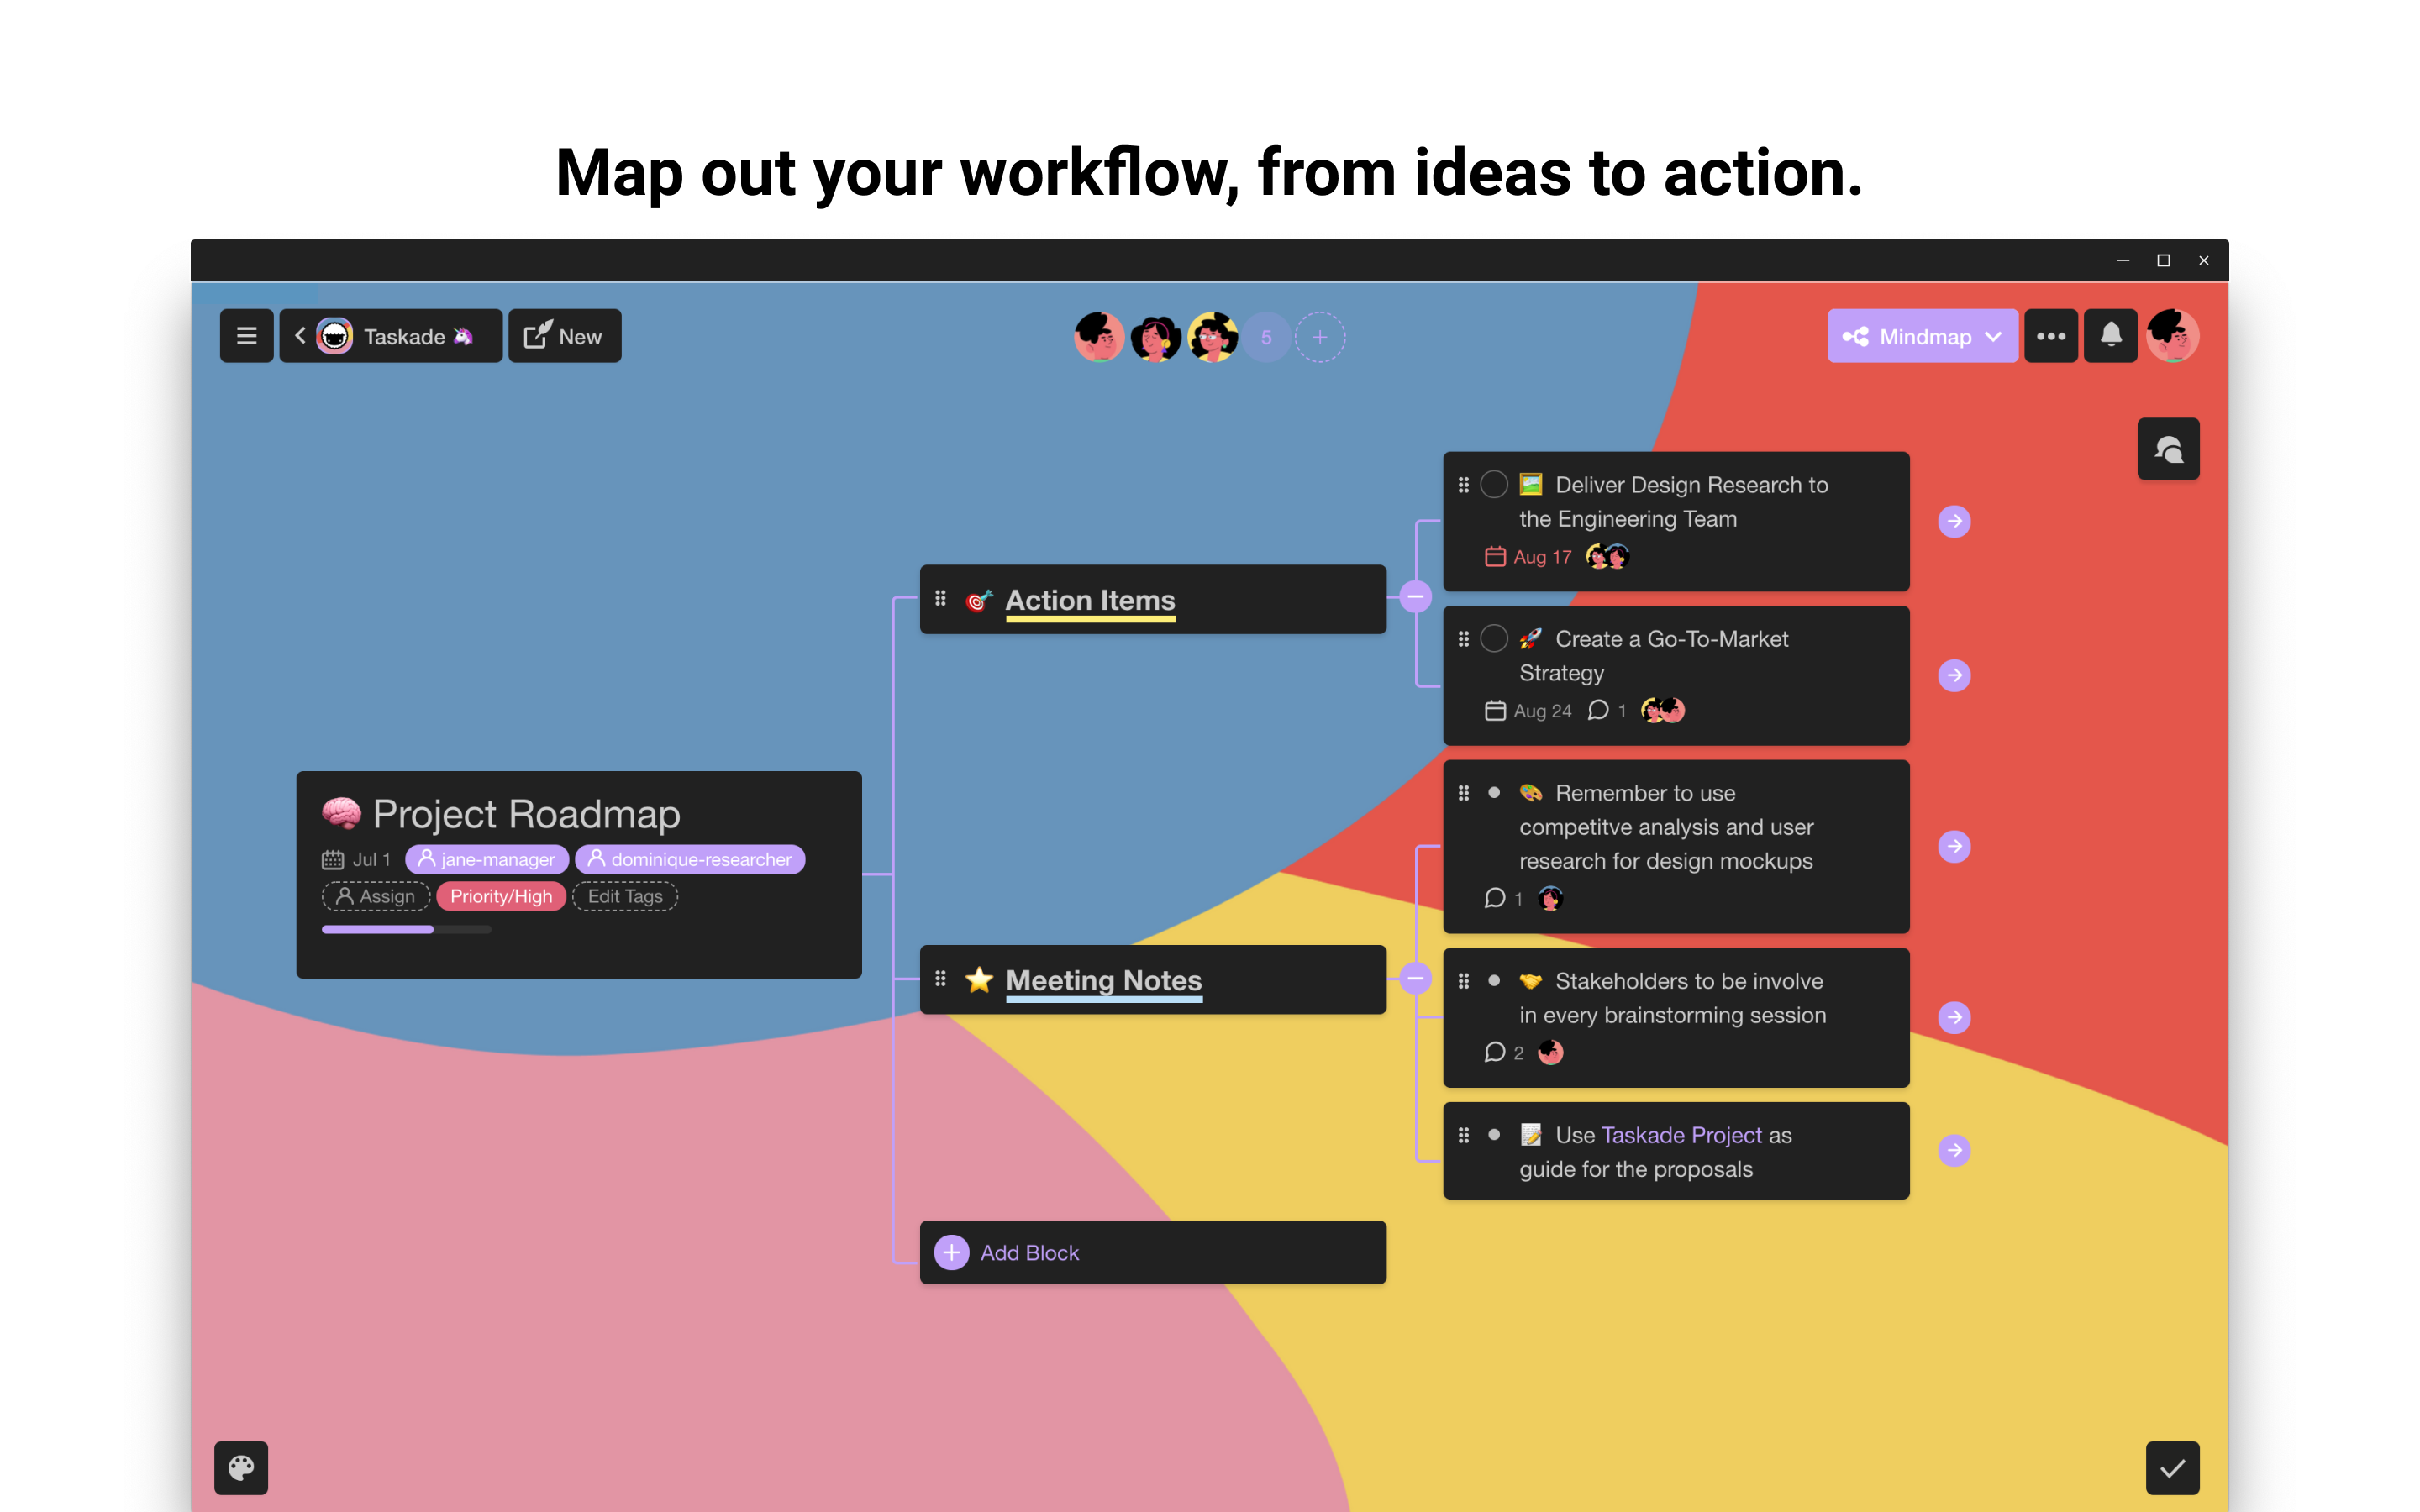 Taskade: Task List, Notes, Mindmap, Chat - Get things done with task lists, workflow automation, and real-time collaboration. Taskade is where remote teams get work done!